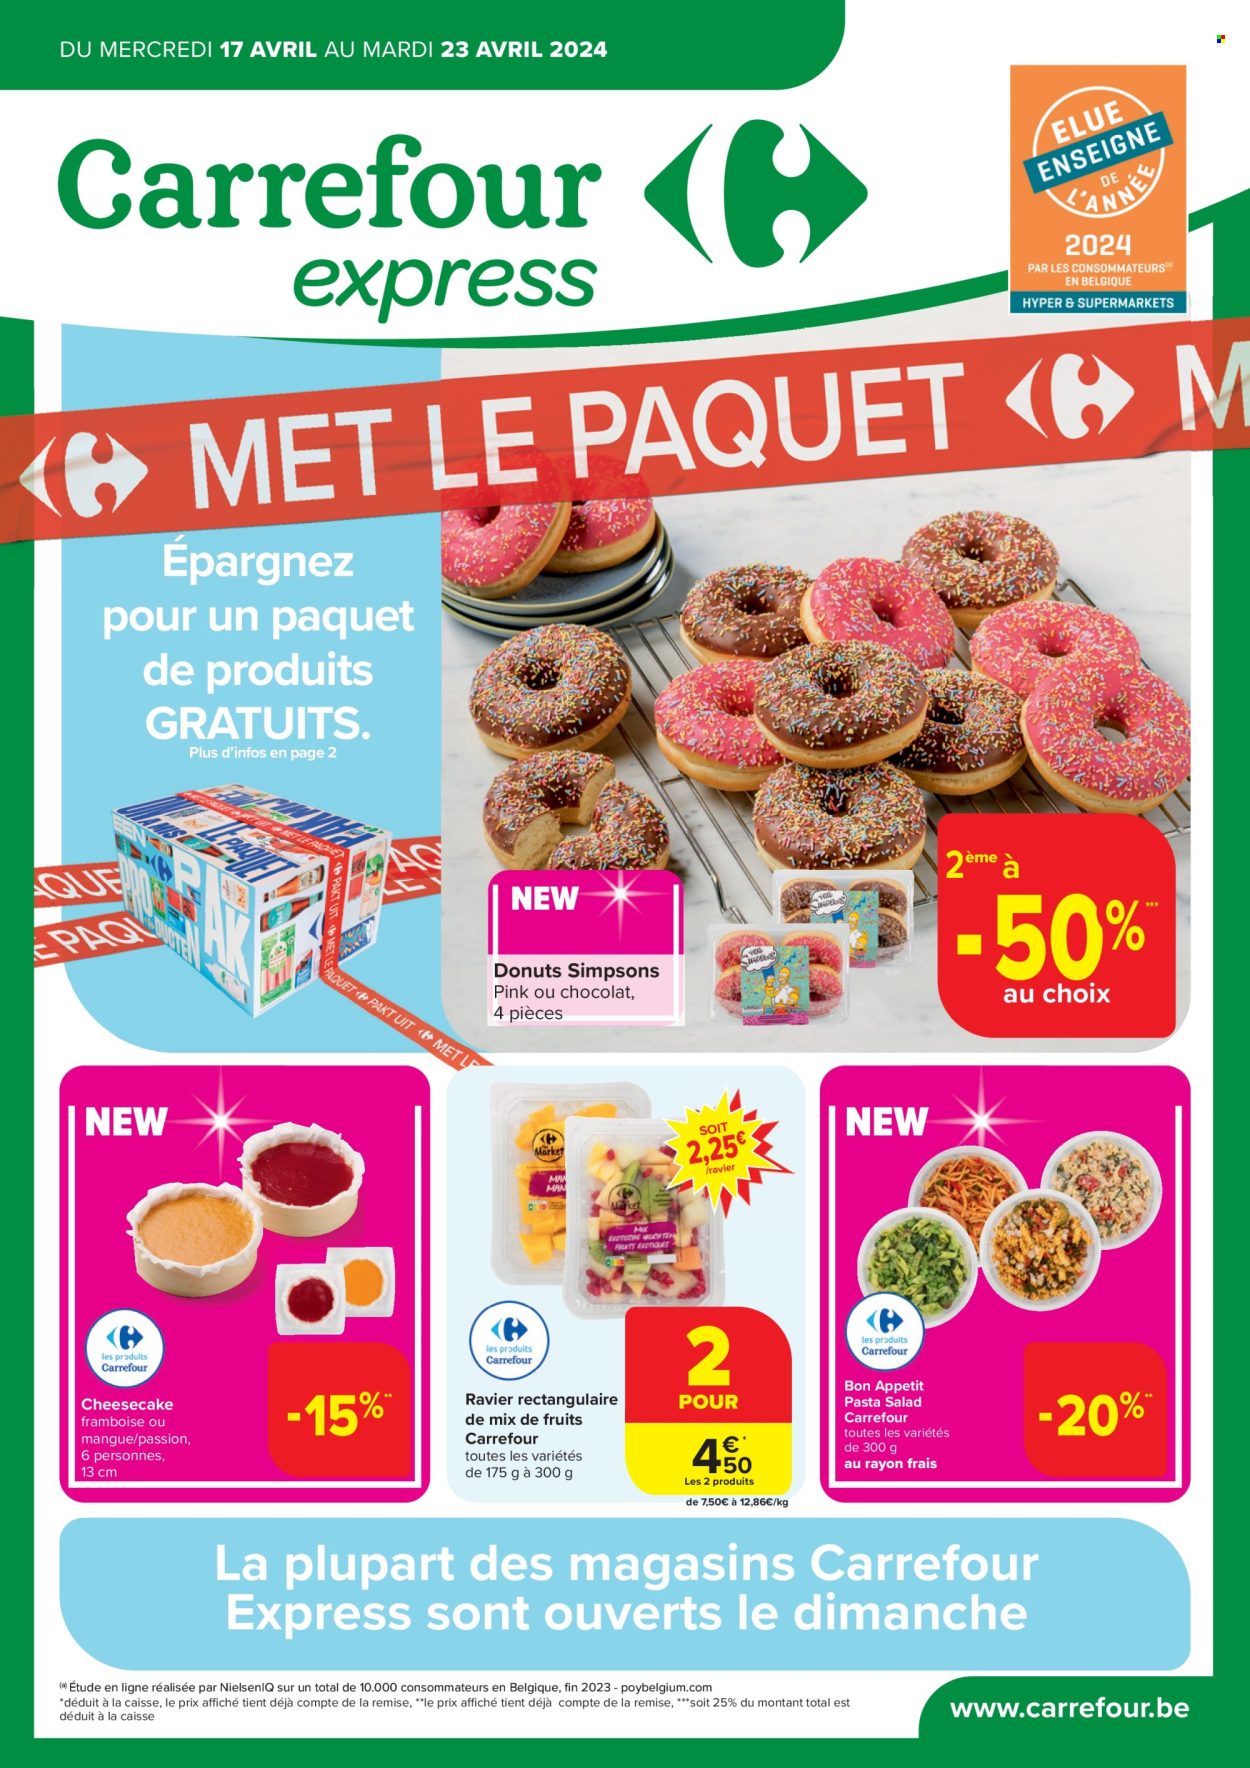 Catalogue Carrefour express - 17.4.2024 - 23.4.2024. Page 1.